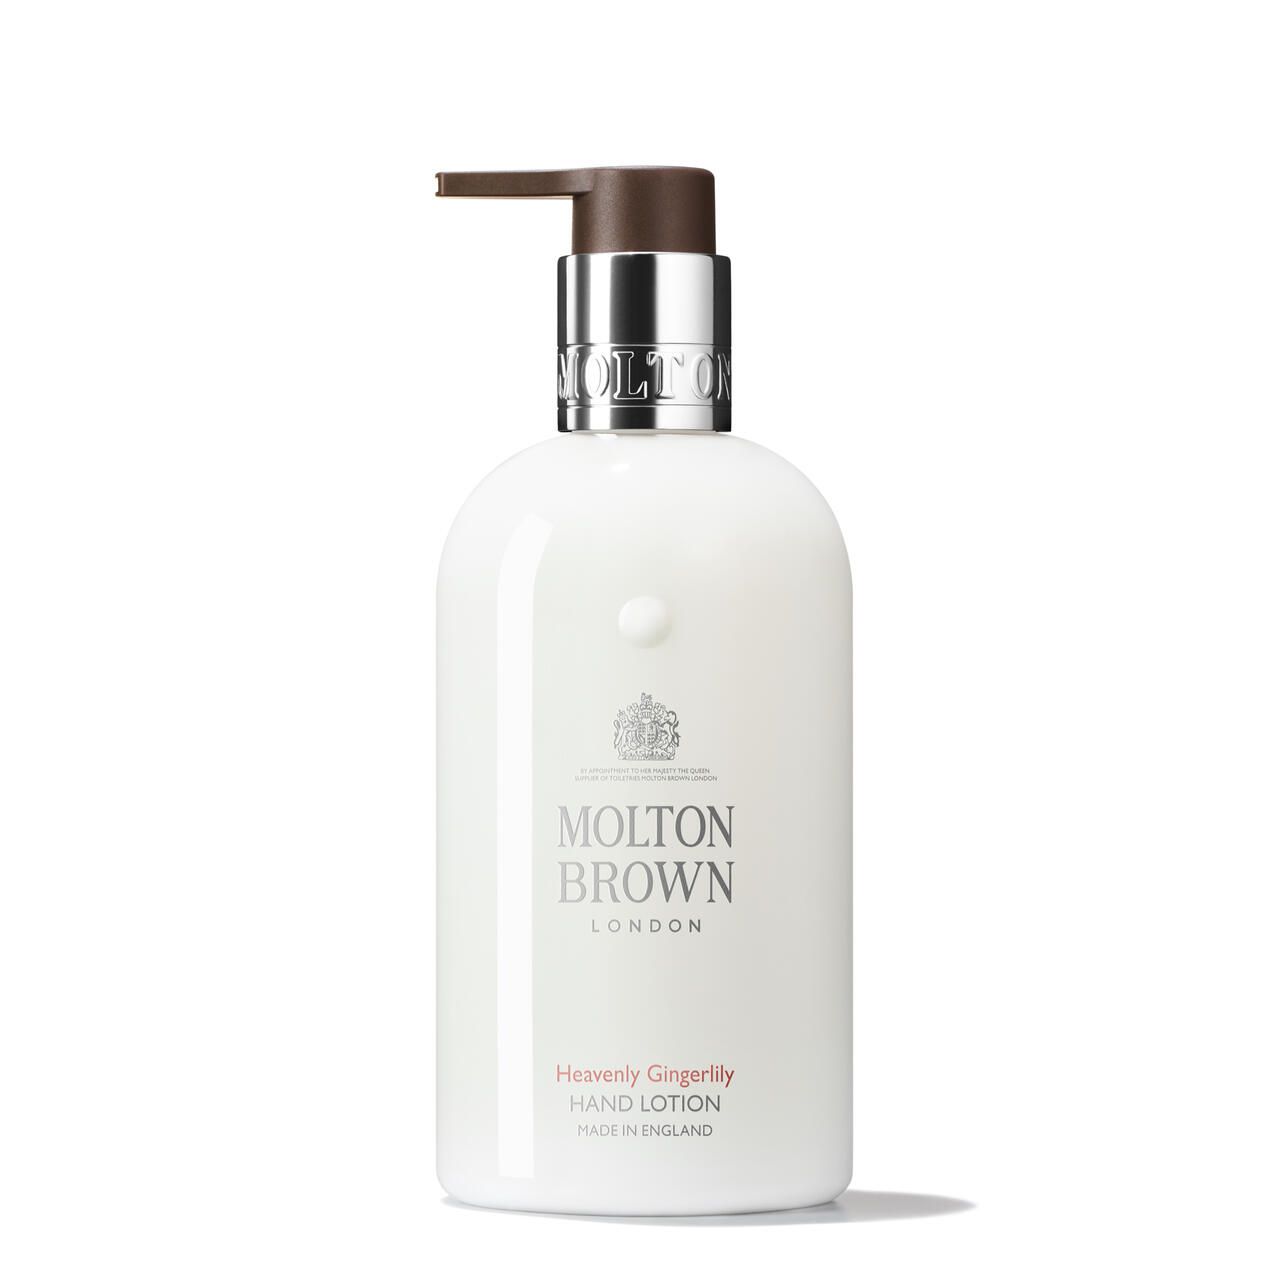 Molton Brown, Heavenly Gingerlily Hand Lotion